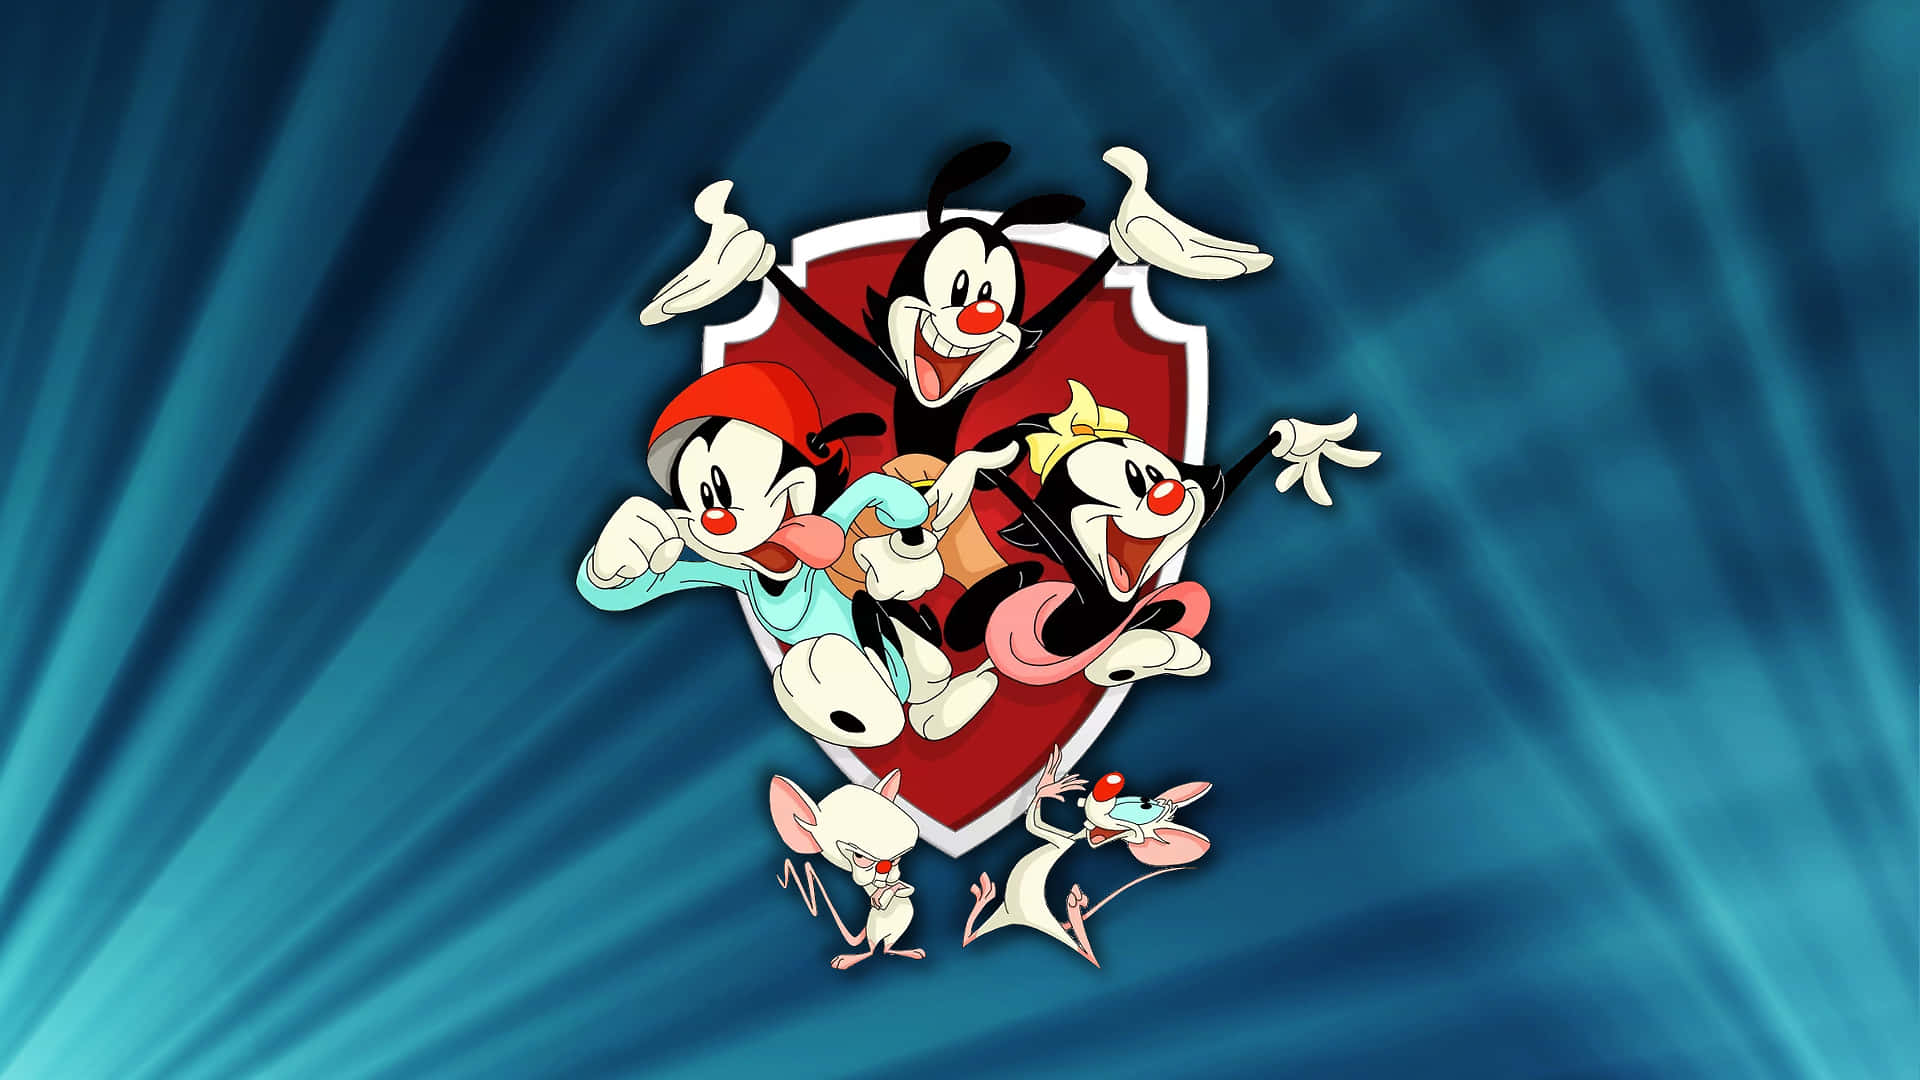 Looney Tunes Cartoon Characters In A Shield